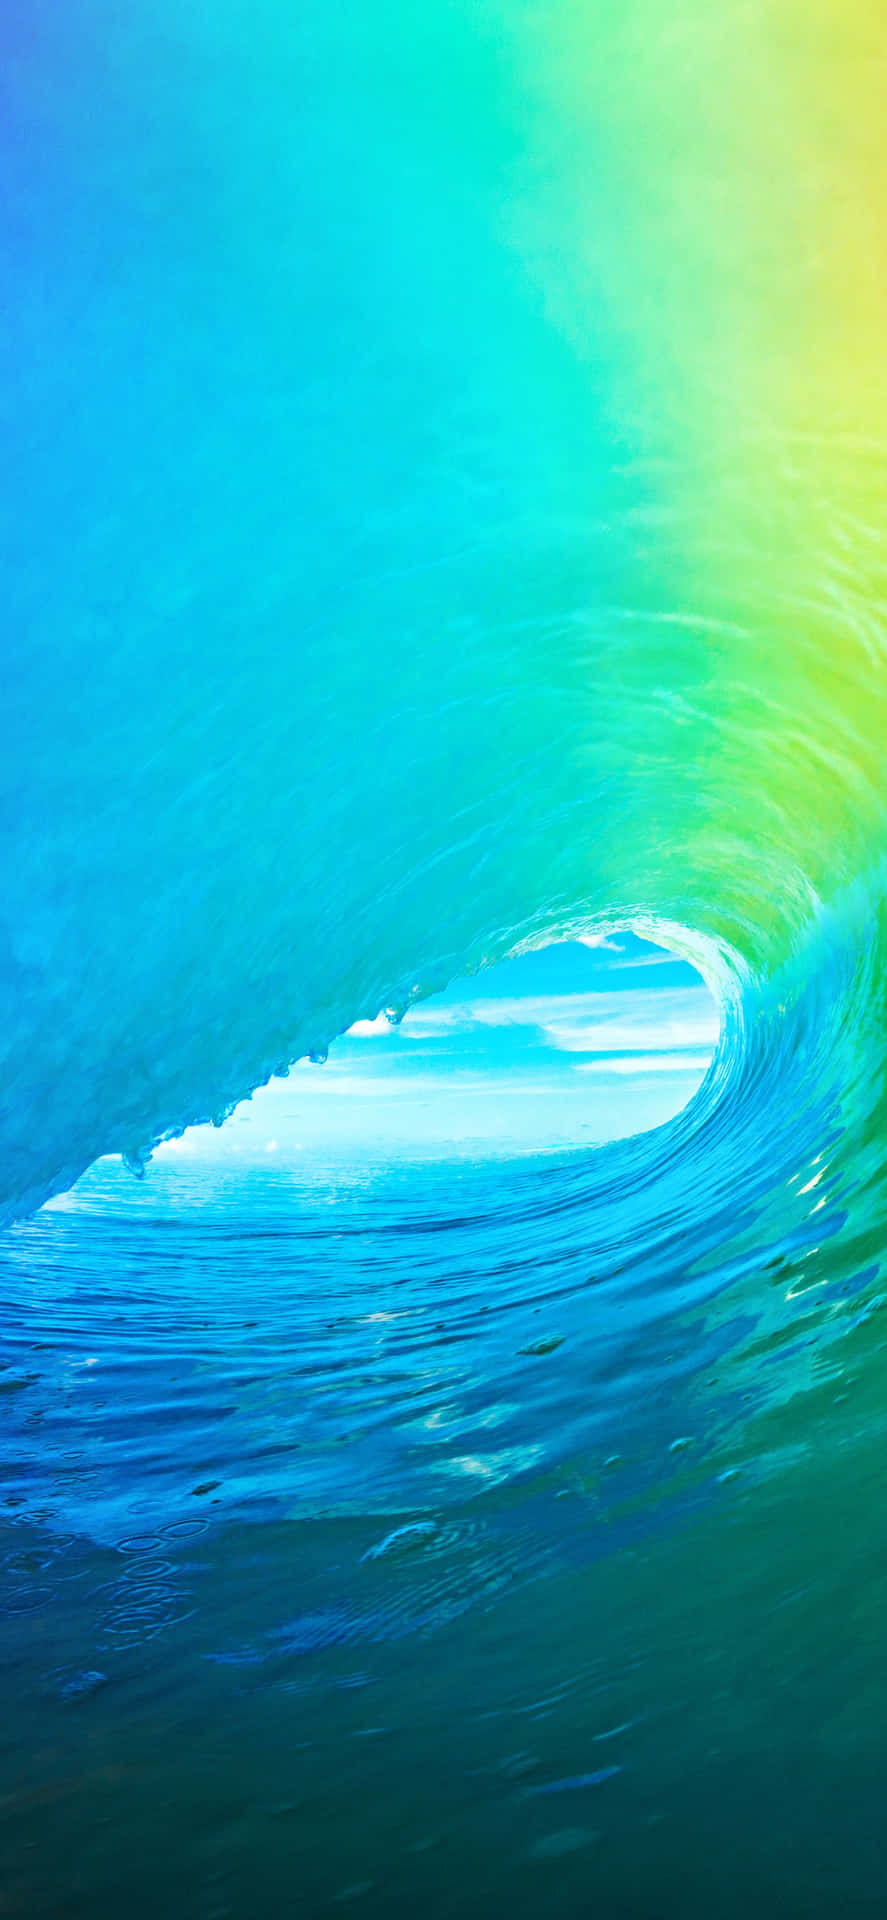 iPhone Classic Blue Wave In The Sea Wallpaper